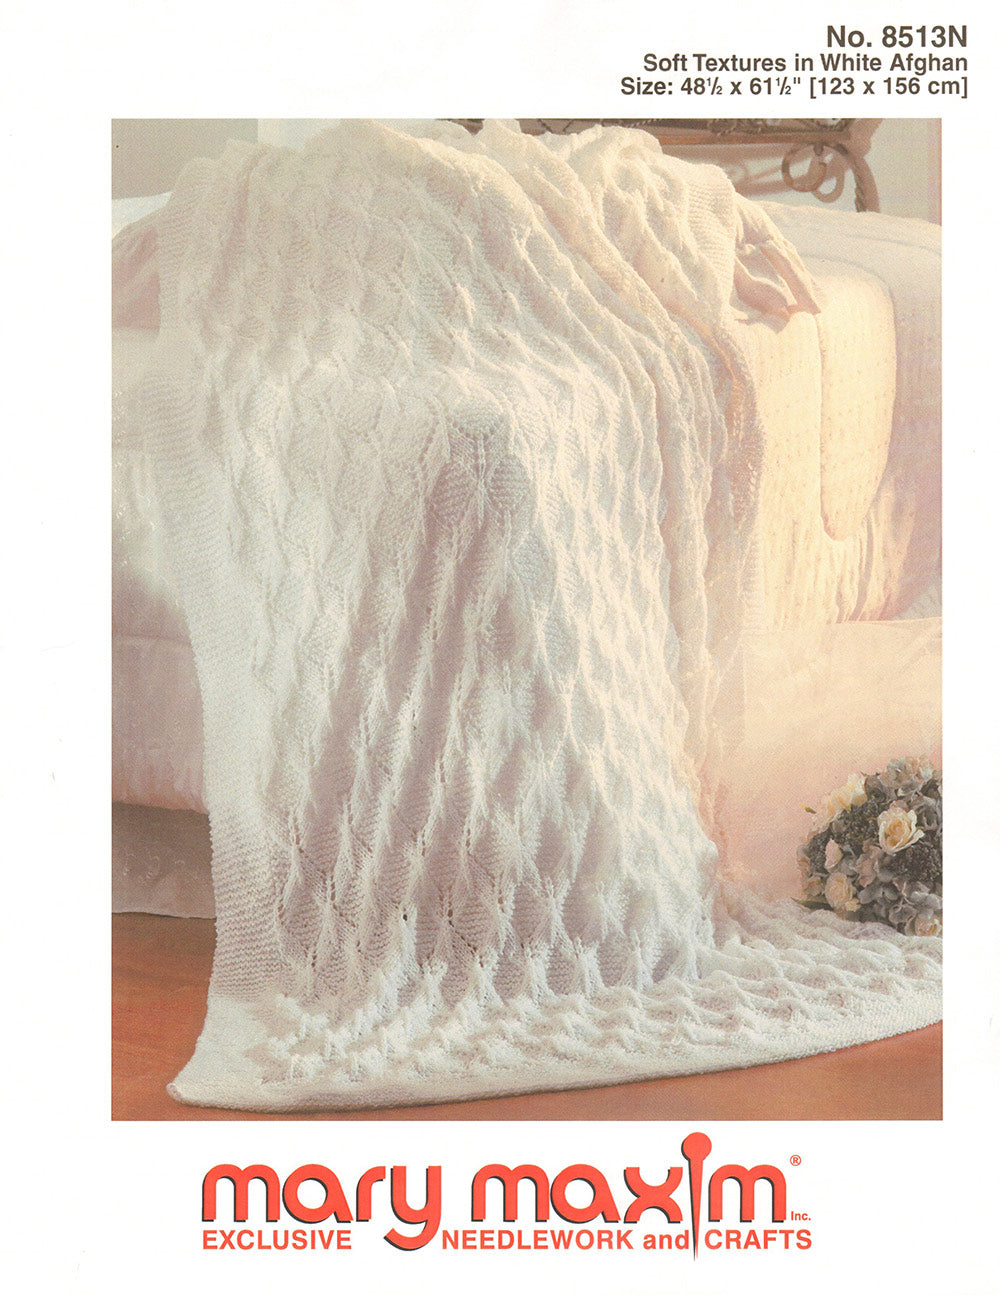 Soft Textures In White Afghan